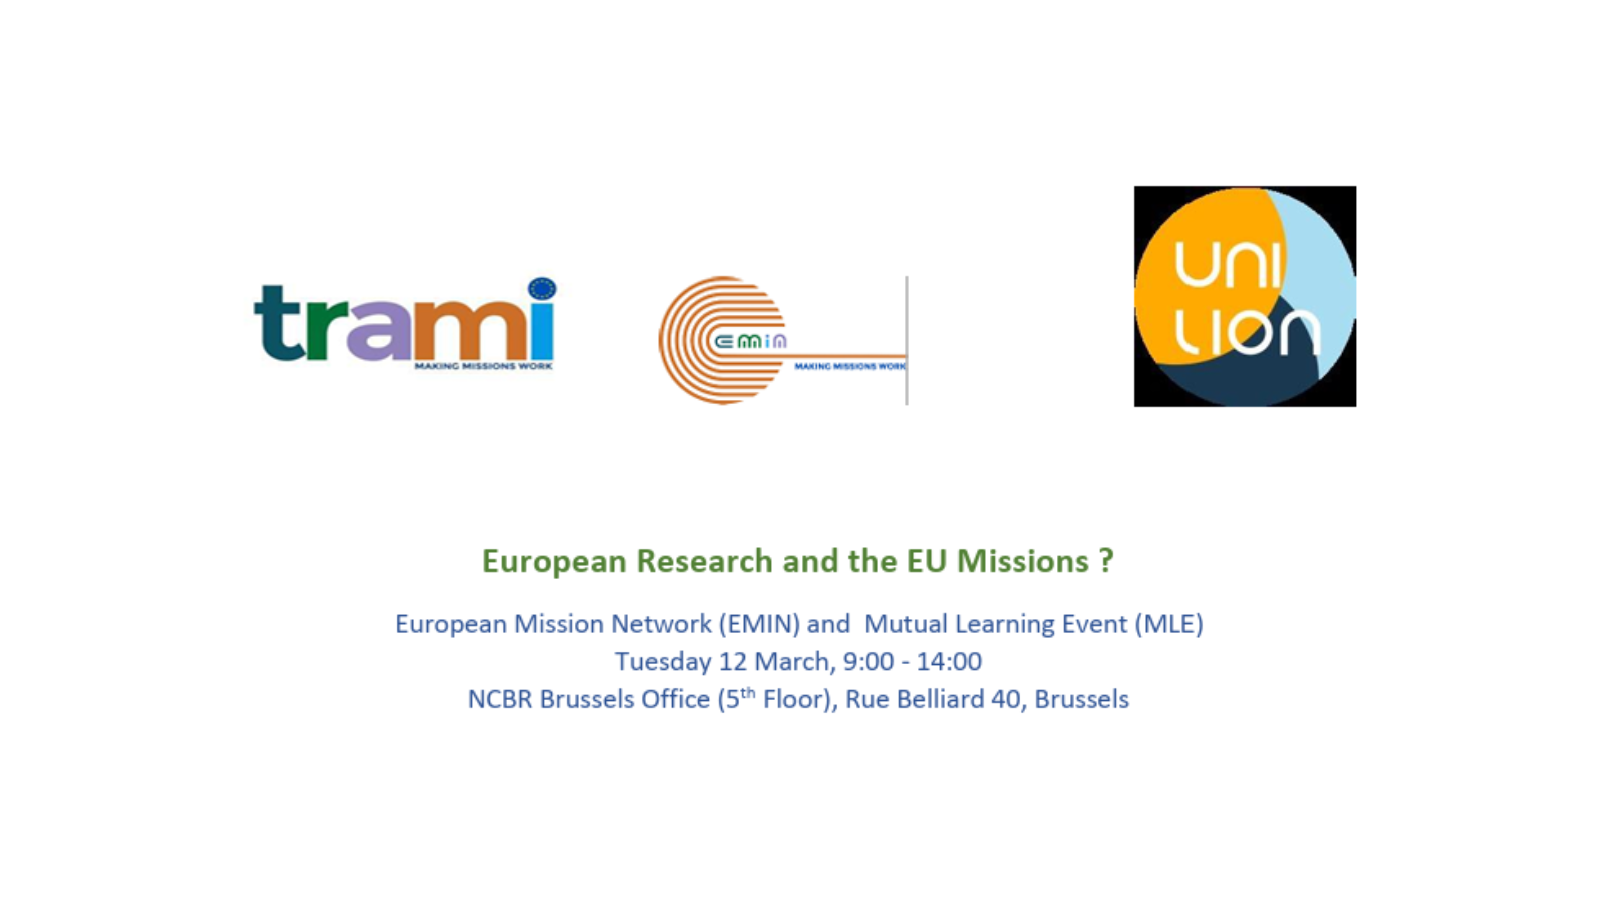 European Mission Network (EMIN) and Mutual Learning Event (MLE): European Research and the EU Missions ?